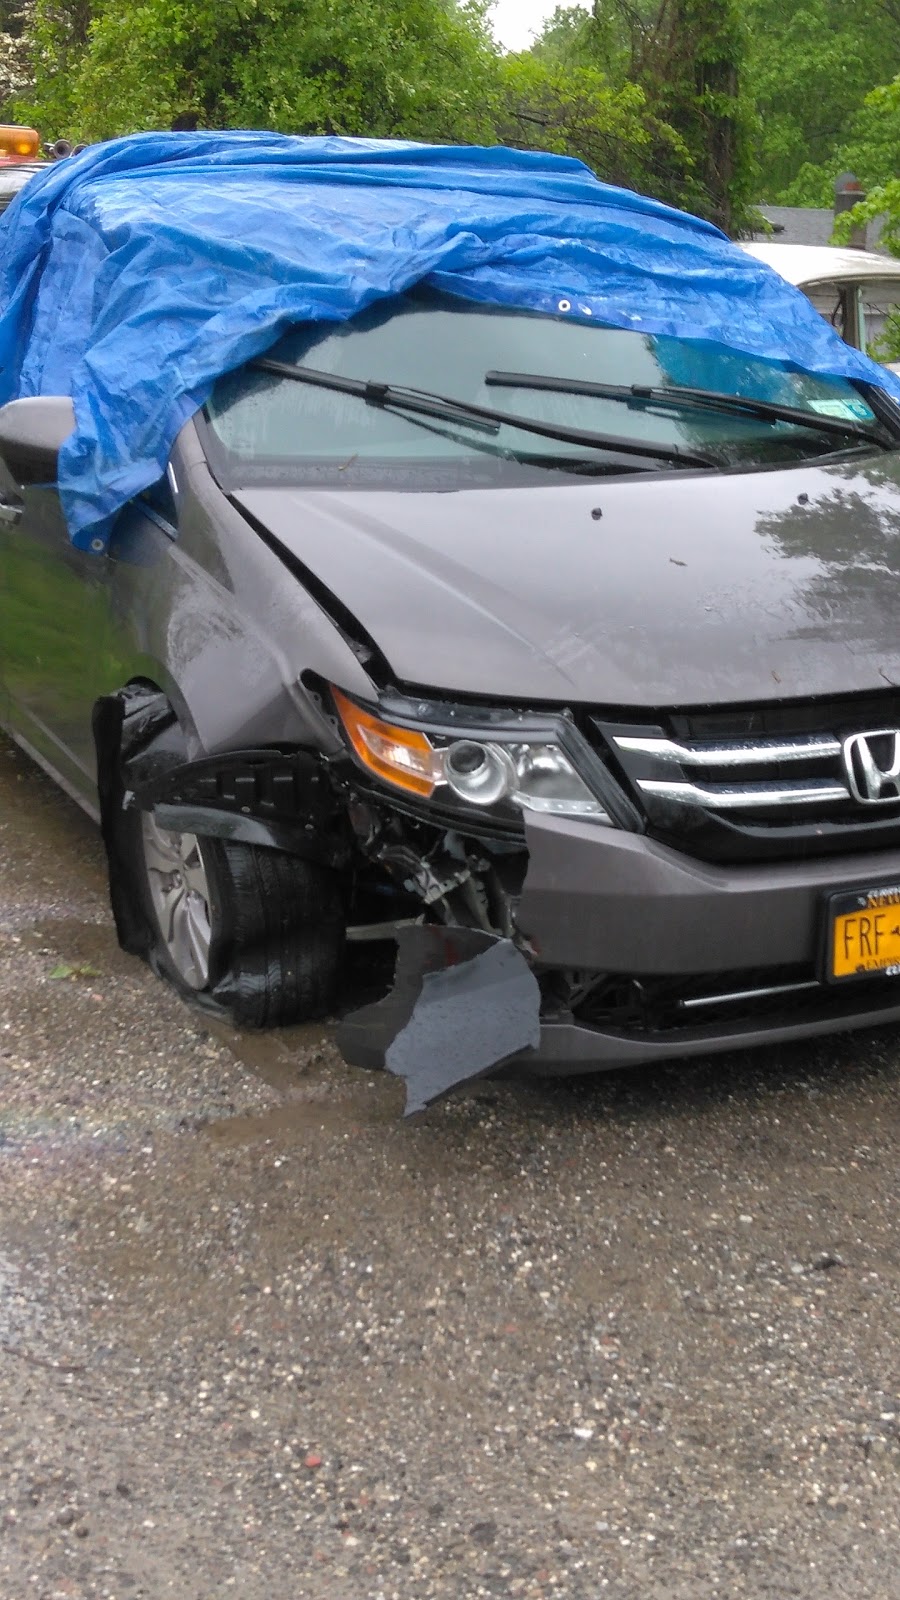 Cortlandt Collision Center | 2104 Albany Post Rd, Montrose, NY 10548 | Phone: (914) 737-0766